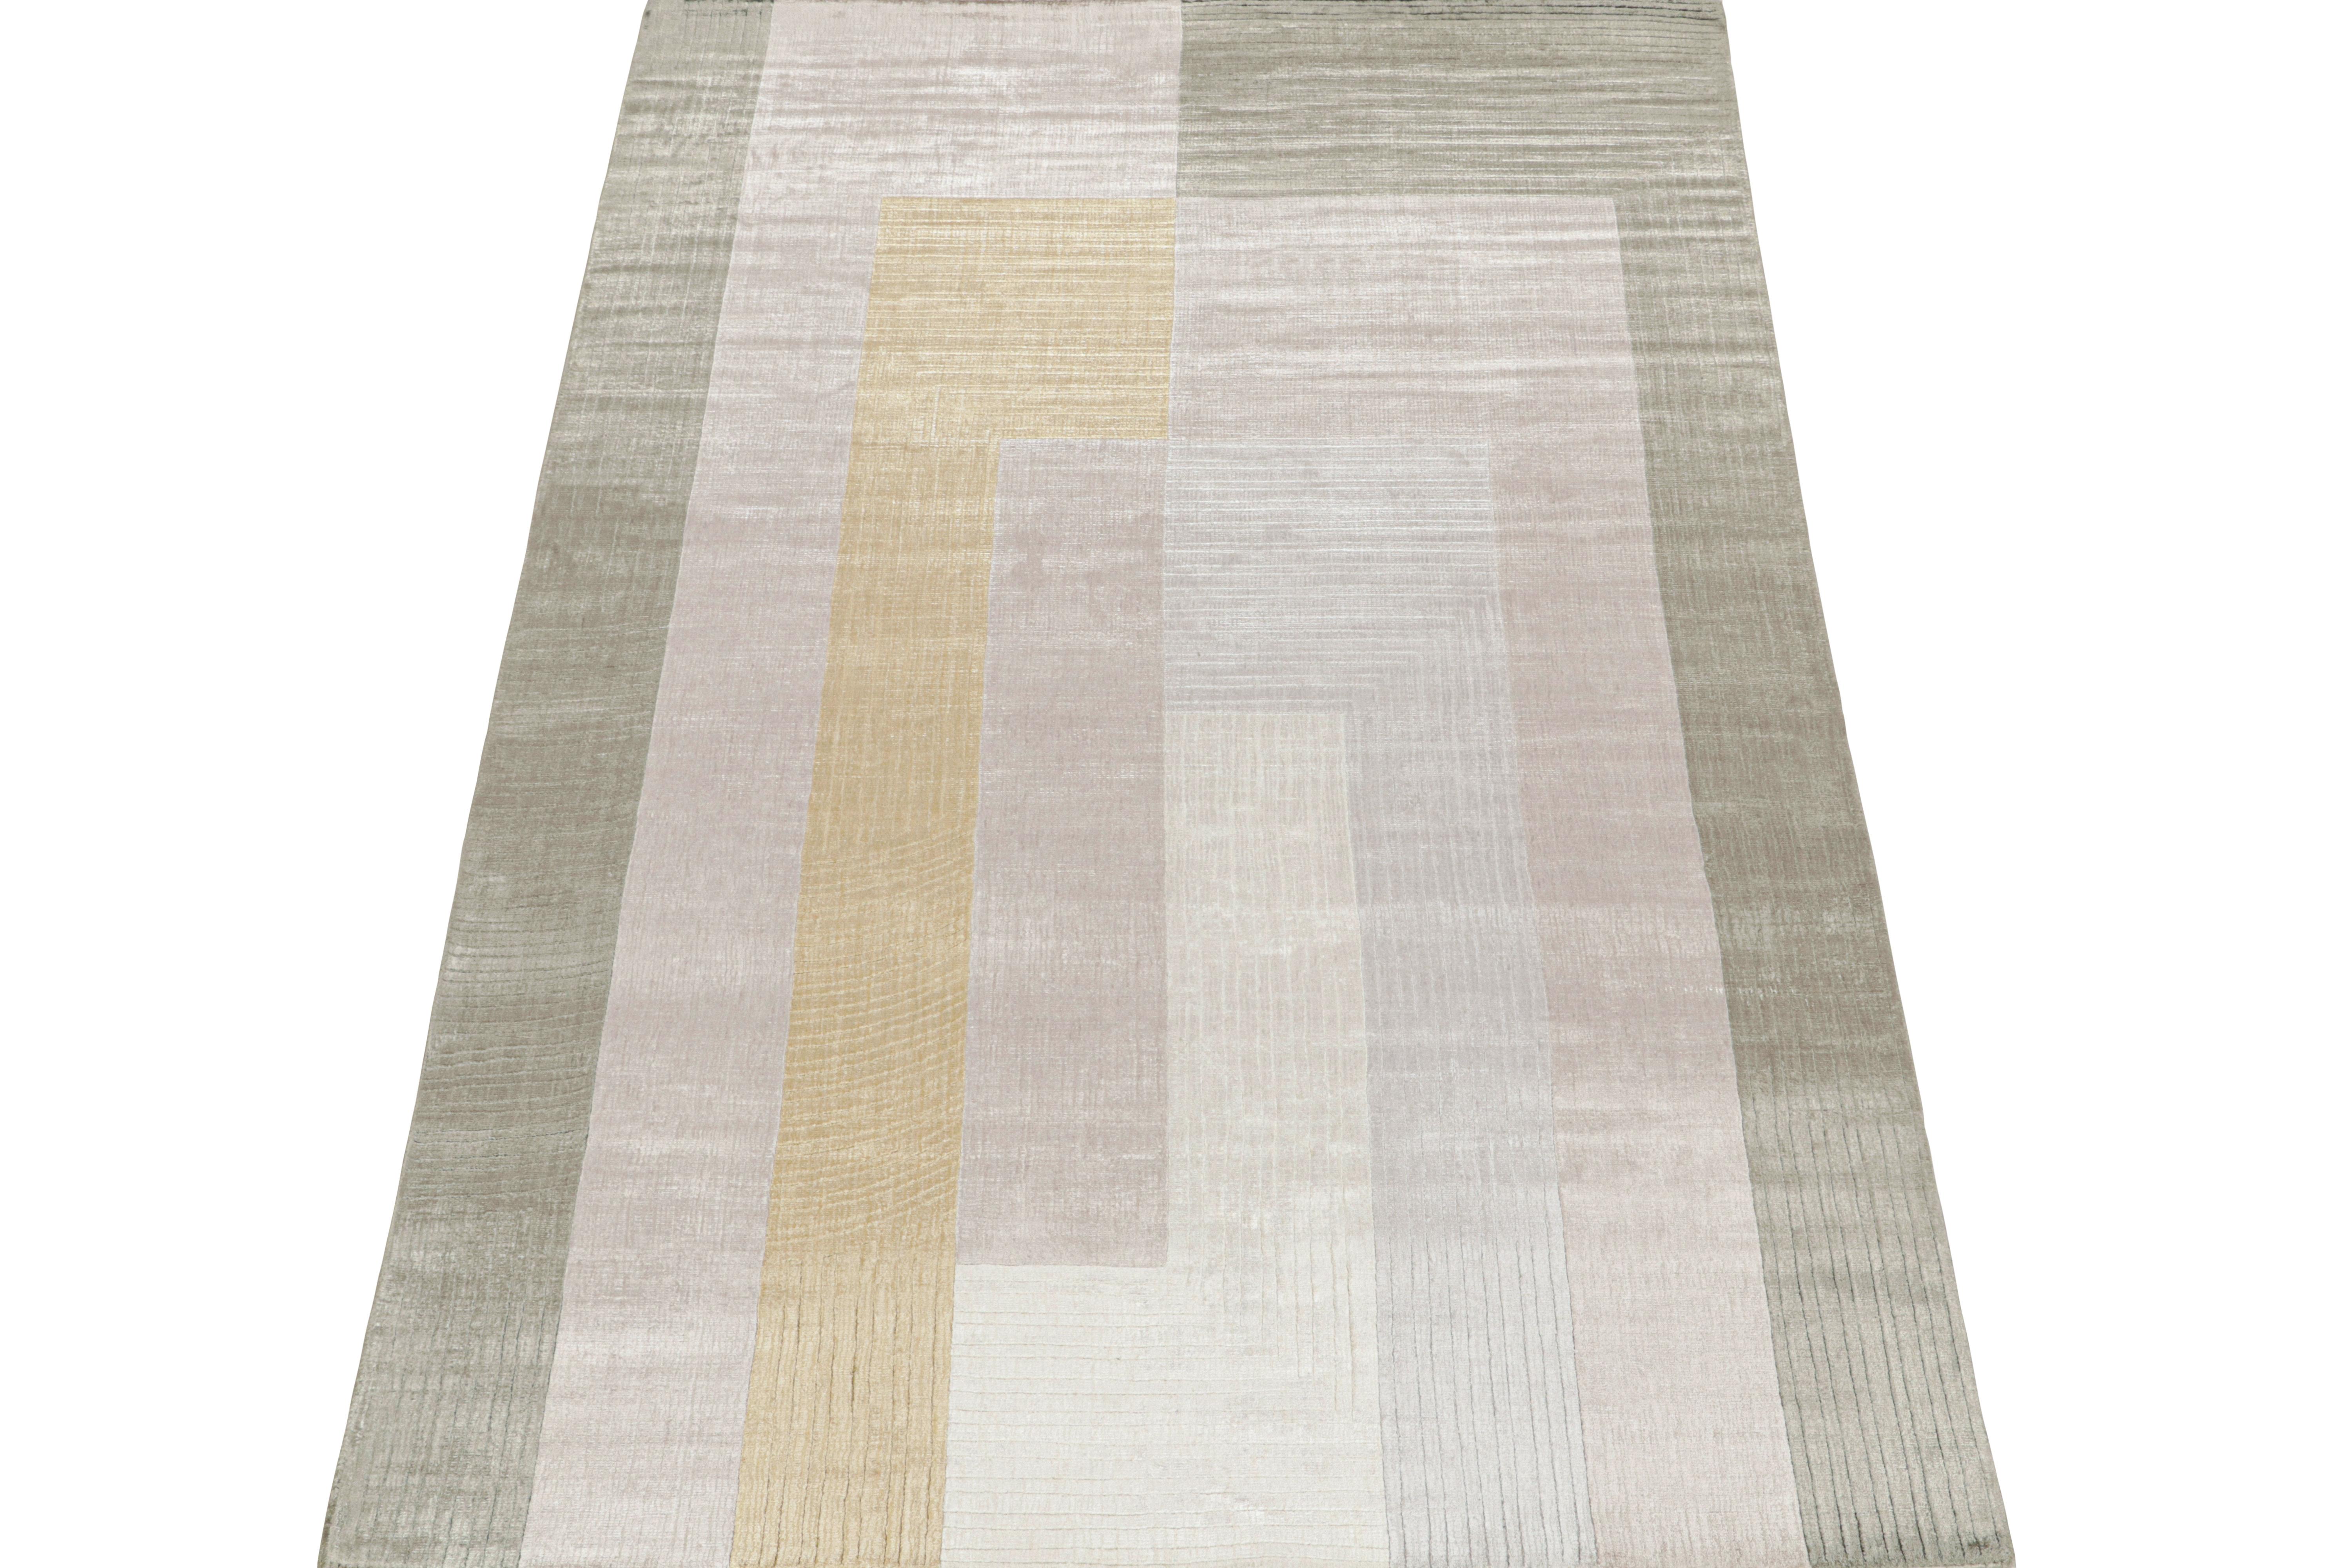 This 5x8 rug is a grand new entry to Rug & Kilim’s Modern Collection. Hand-knotted in art silk.

Connoisseurs will note this piece is from our new Light on Loom line, which includes quicker custom capabilities than ever before. This piece and others